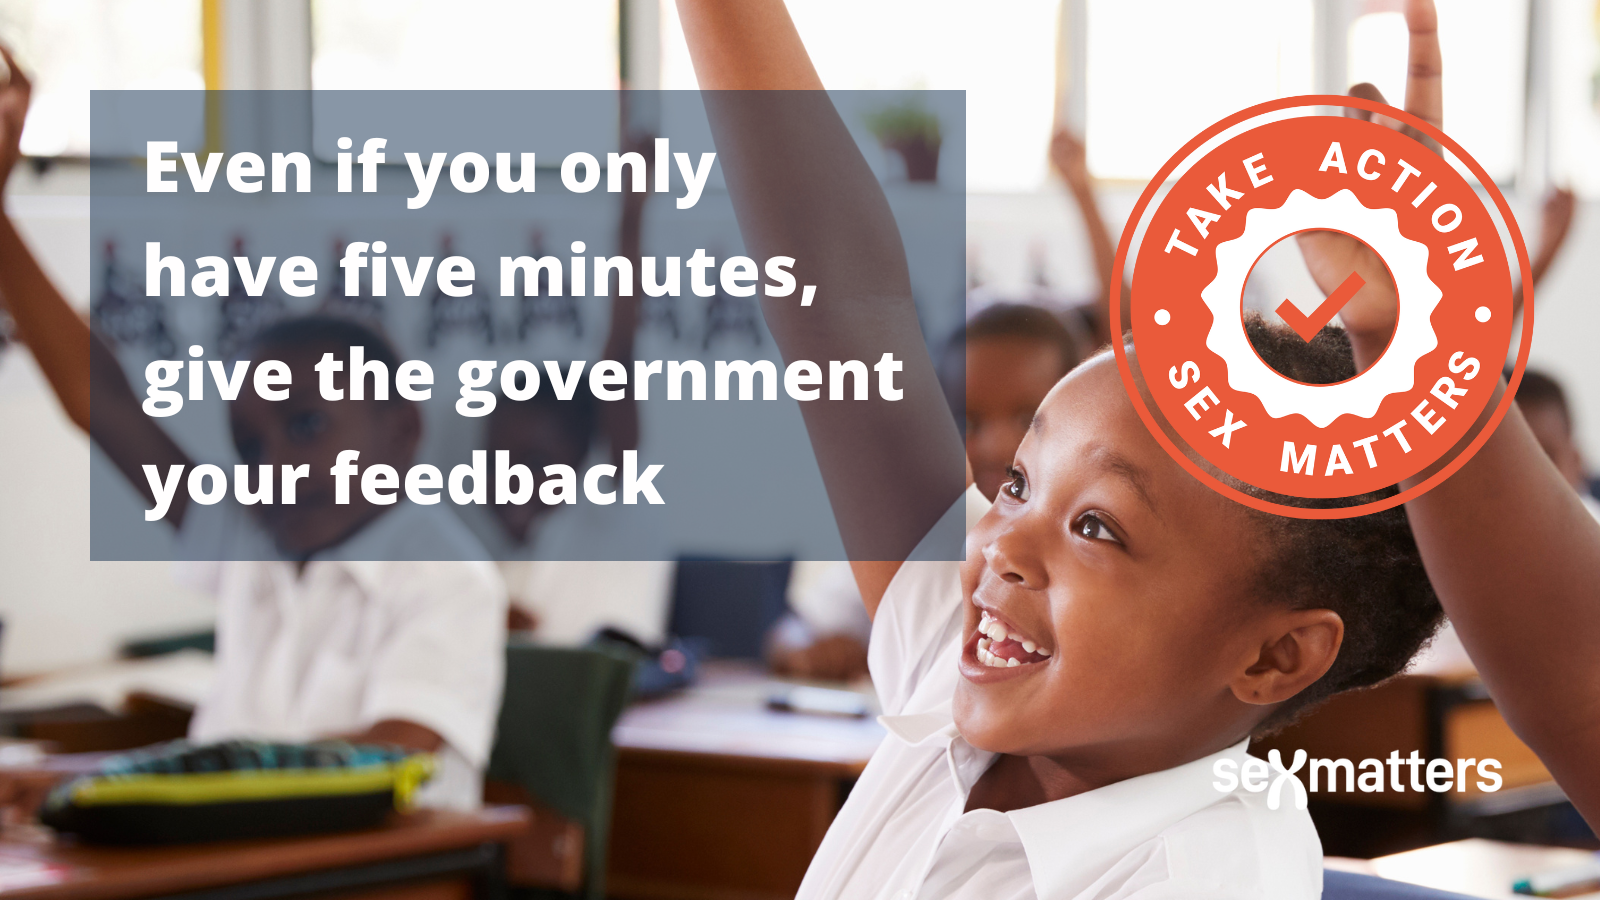 Even if you only have five minutes, give the government your feedback